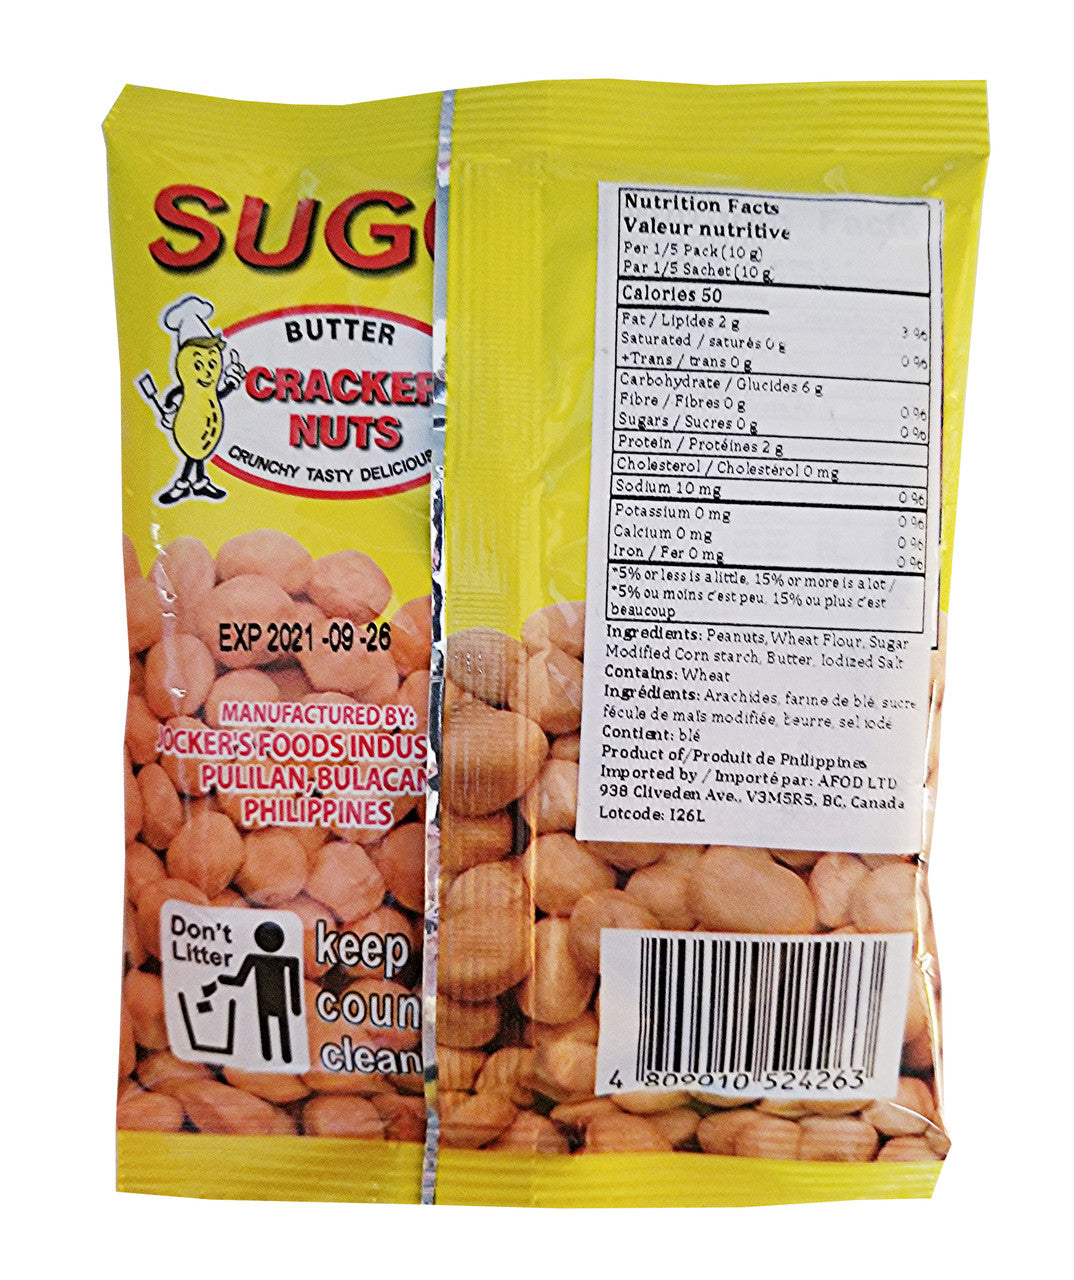 Sugo Butter Cracker Nuts, Peanuts 50g/1.75 oz., Bag{Imported from Canada}